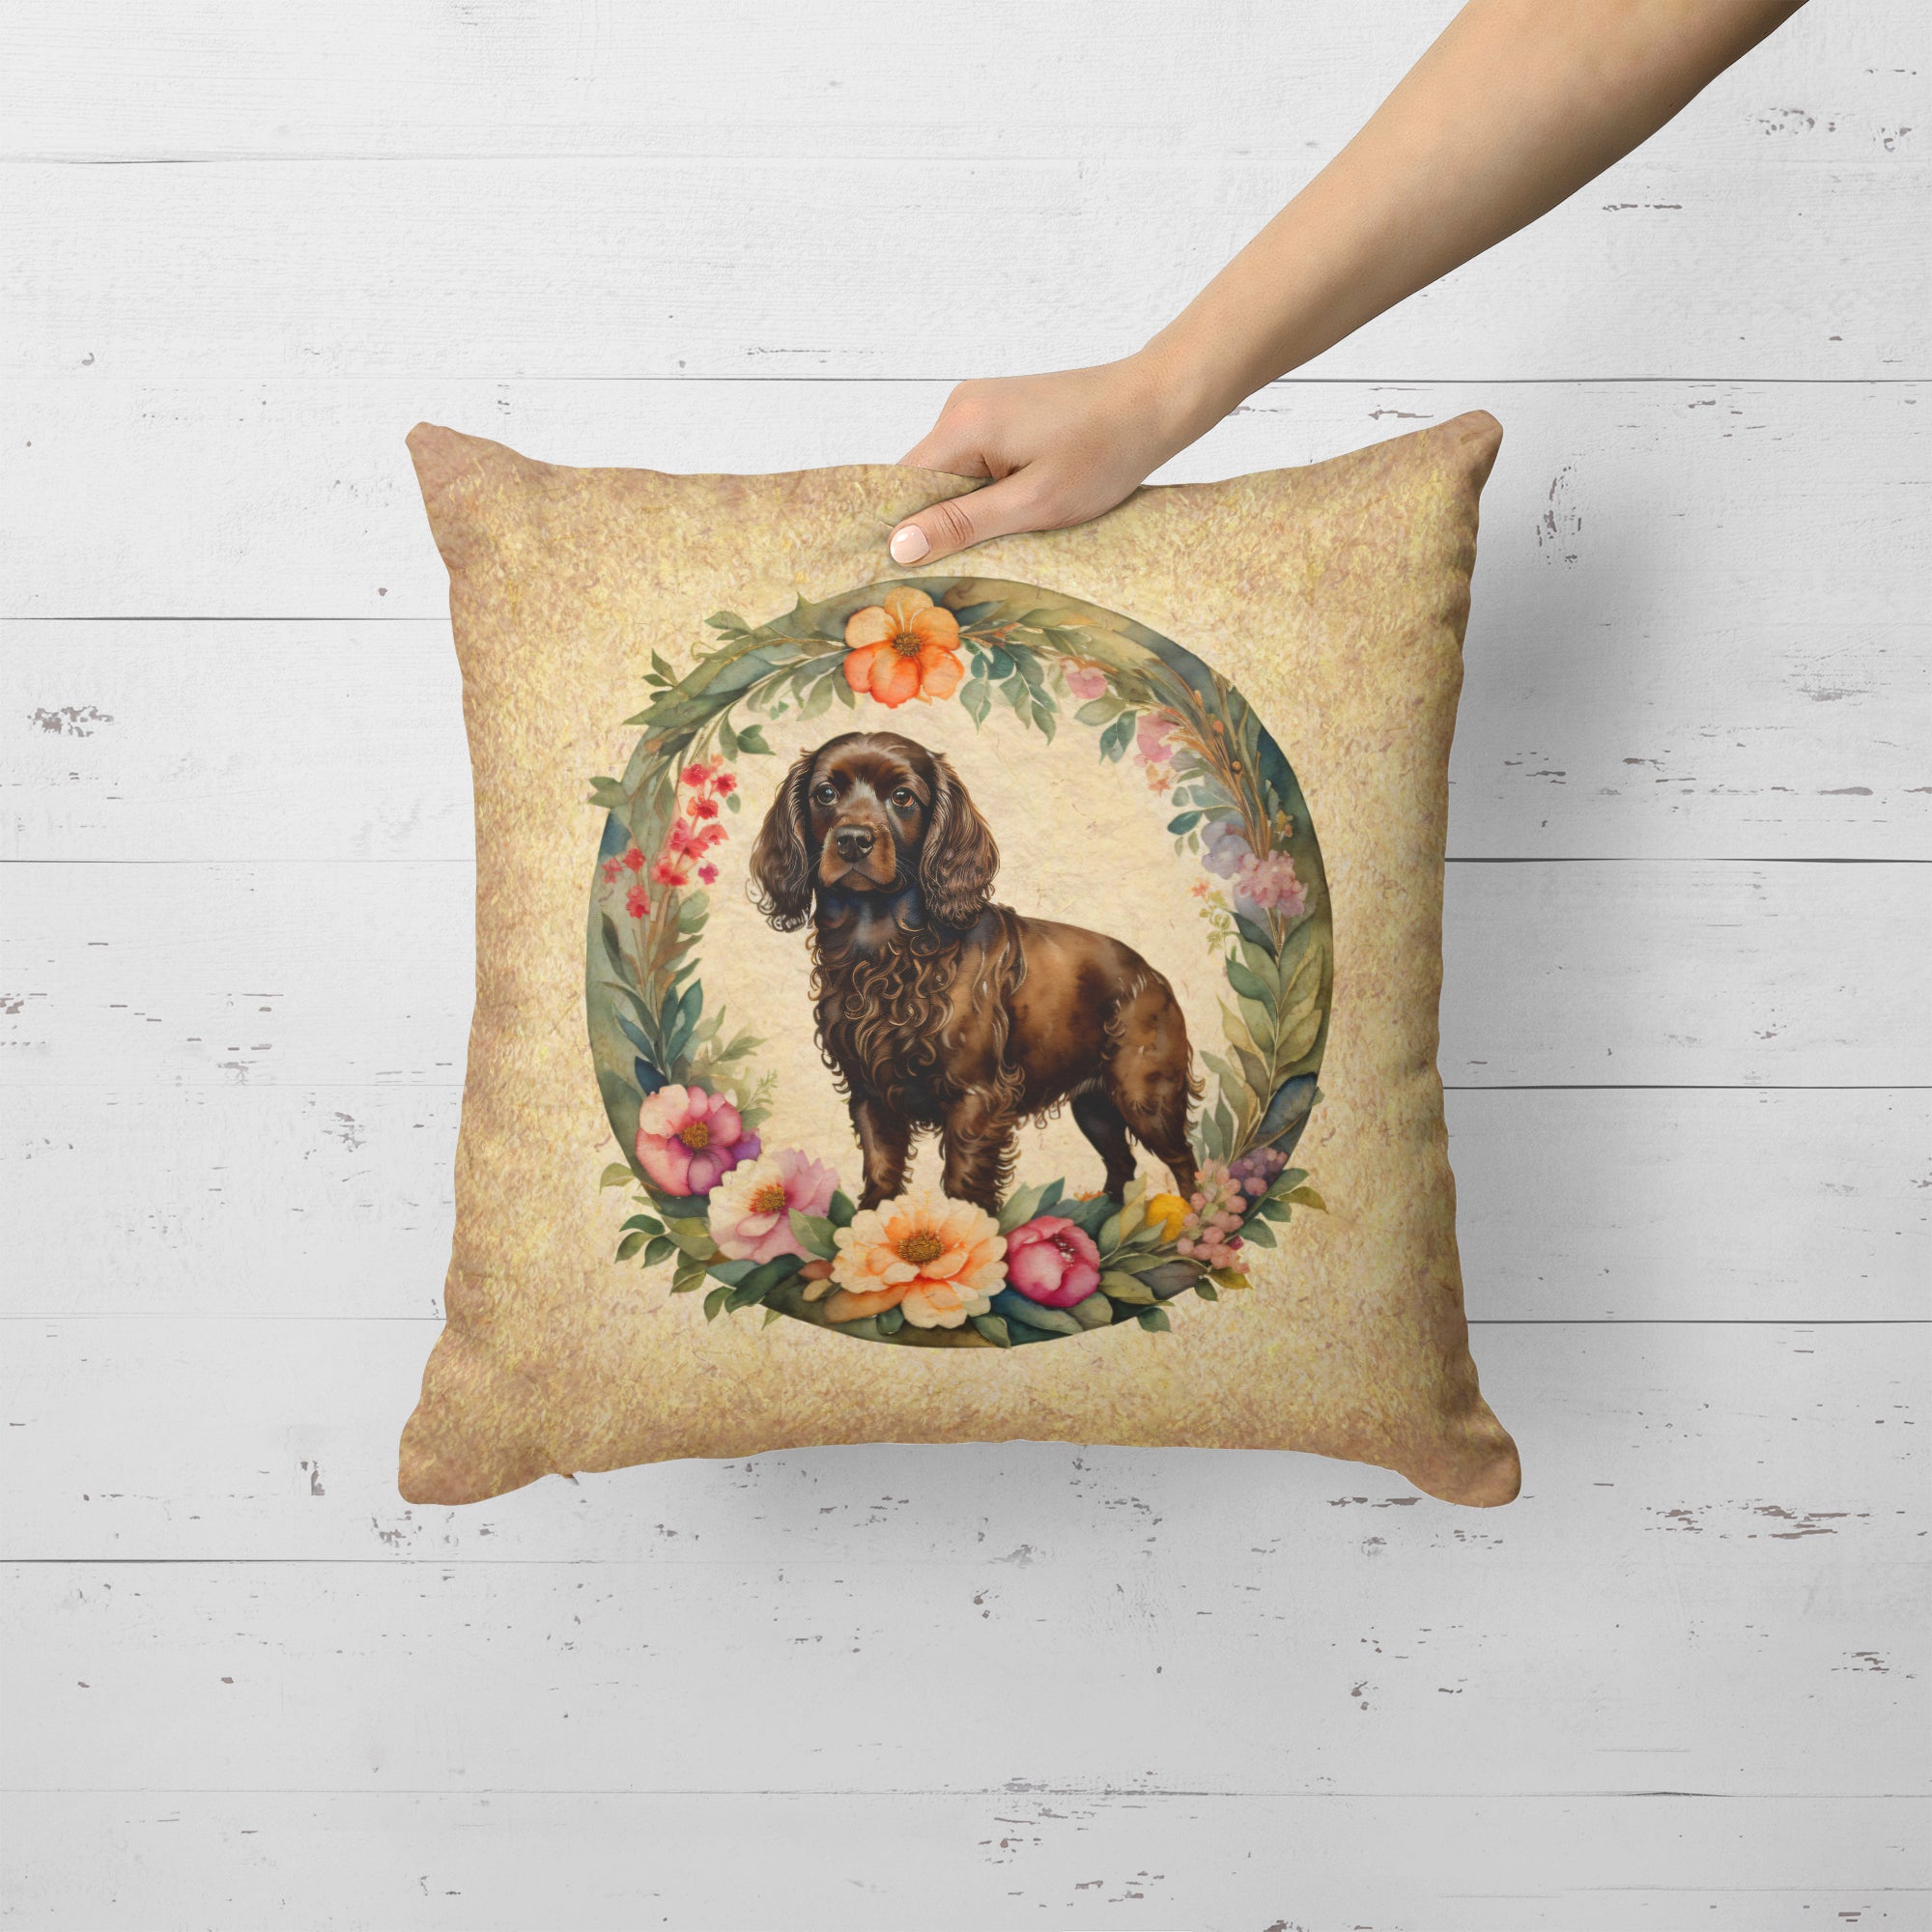 Buy this Boykin Spaniel and Flowers Fabric Decorative Pillow